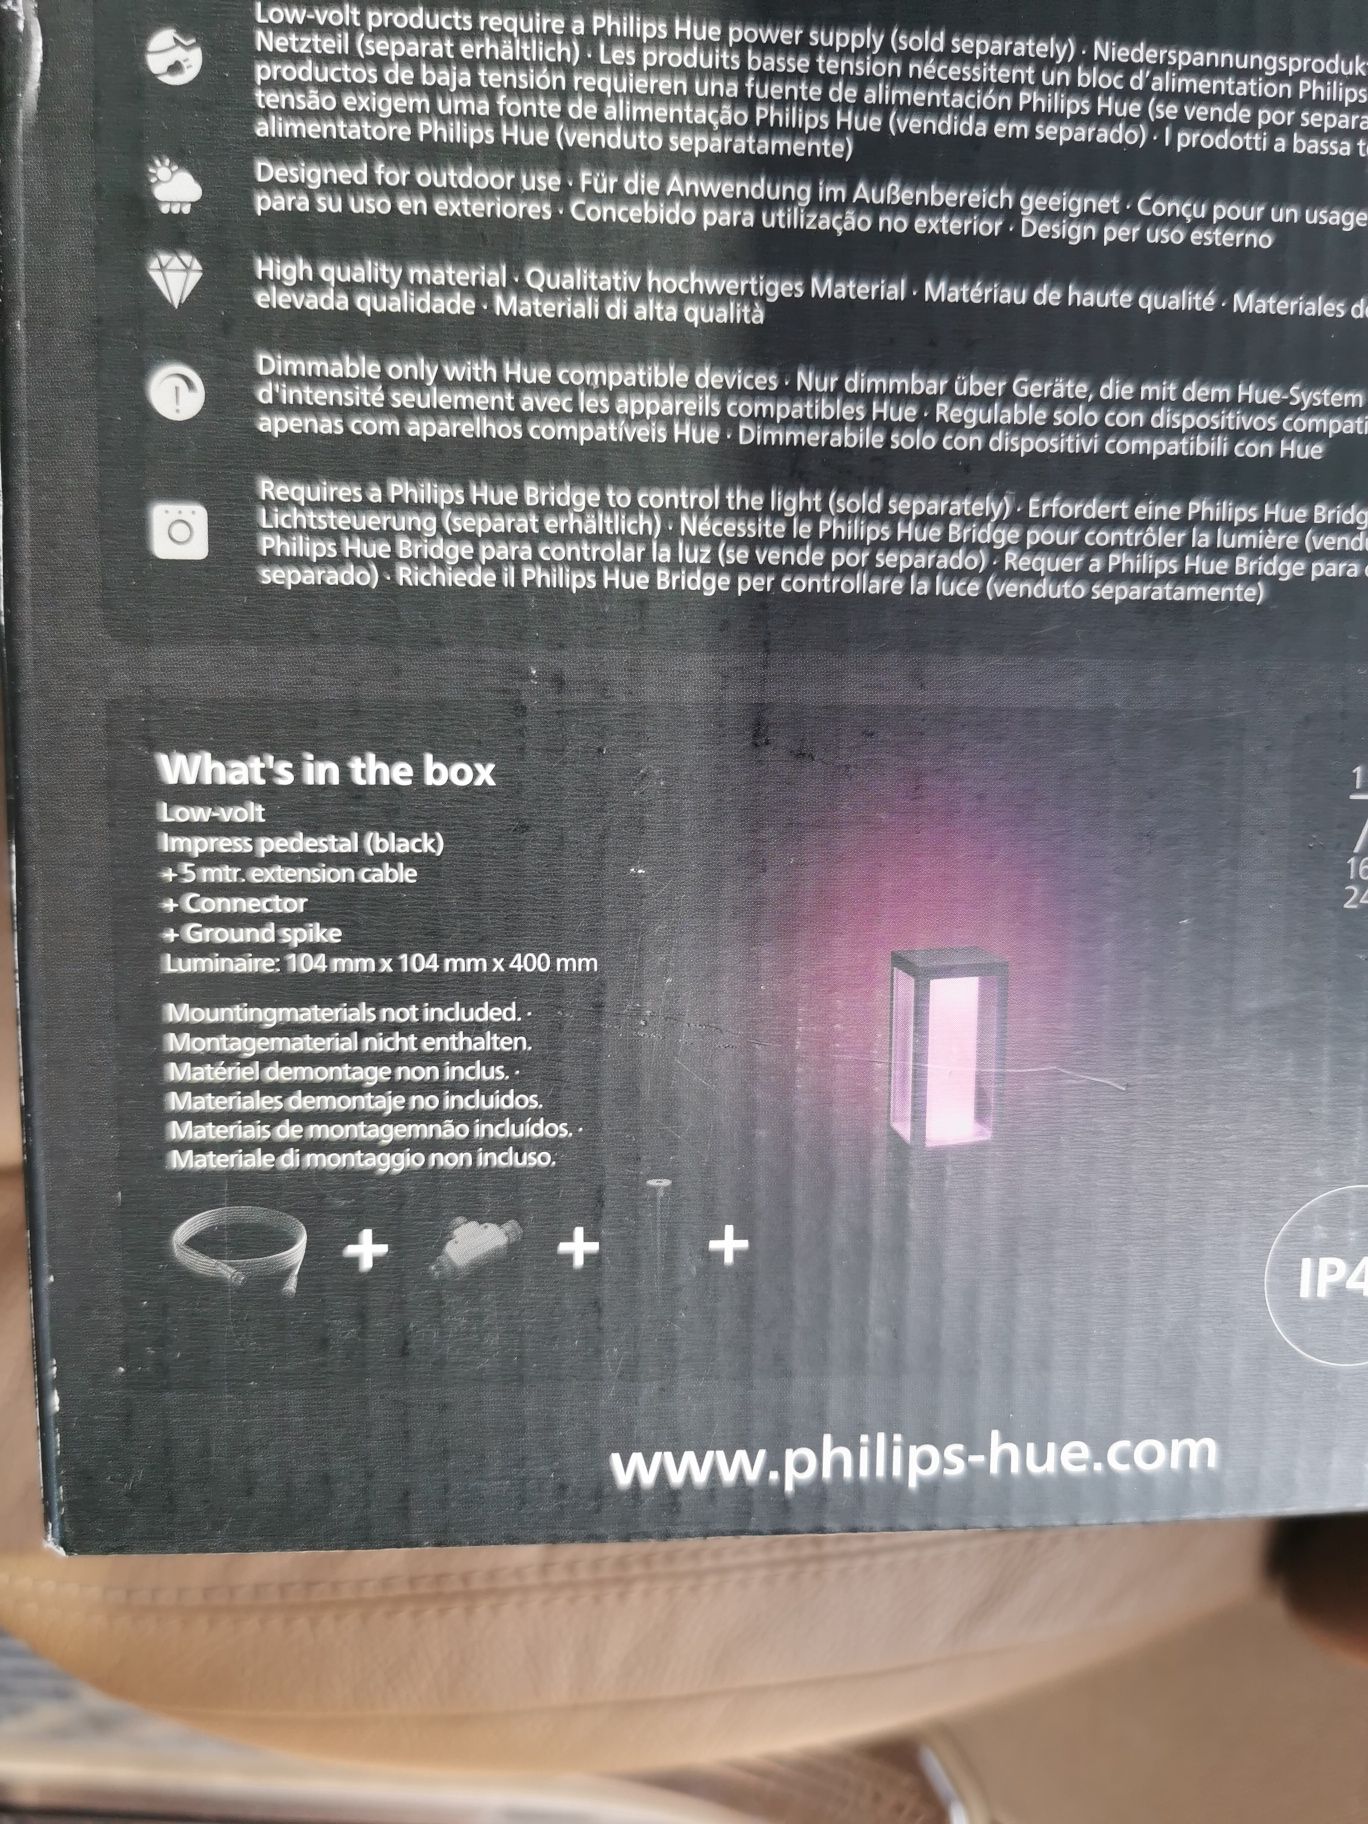 Impress hue White and color ambiance philips lampa kinkiet